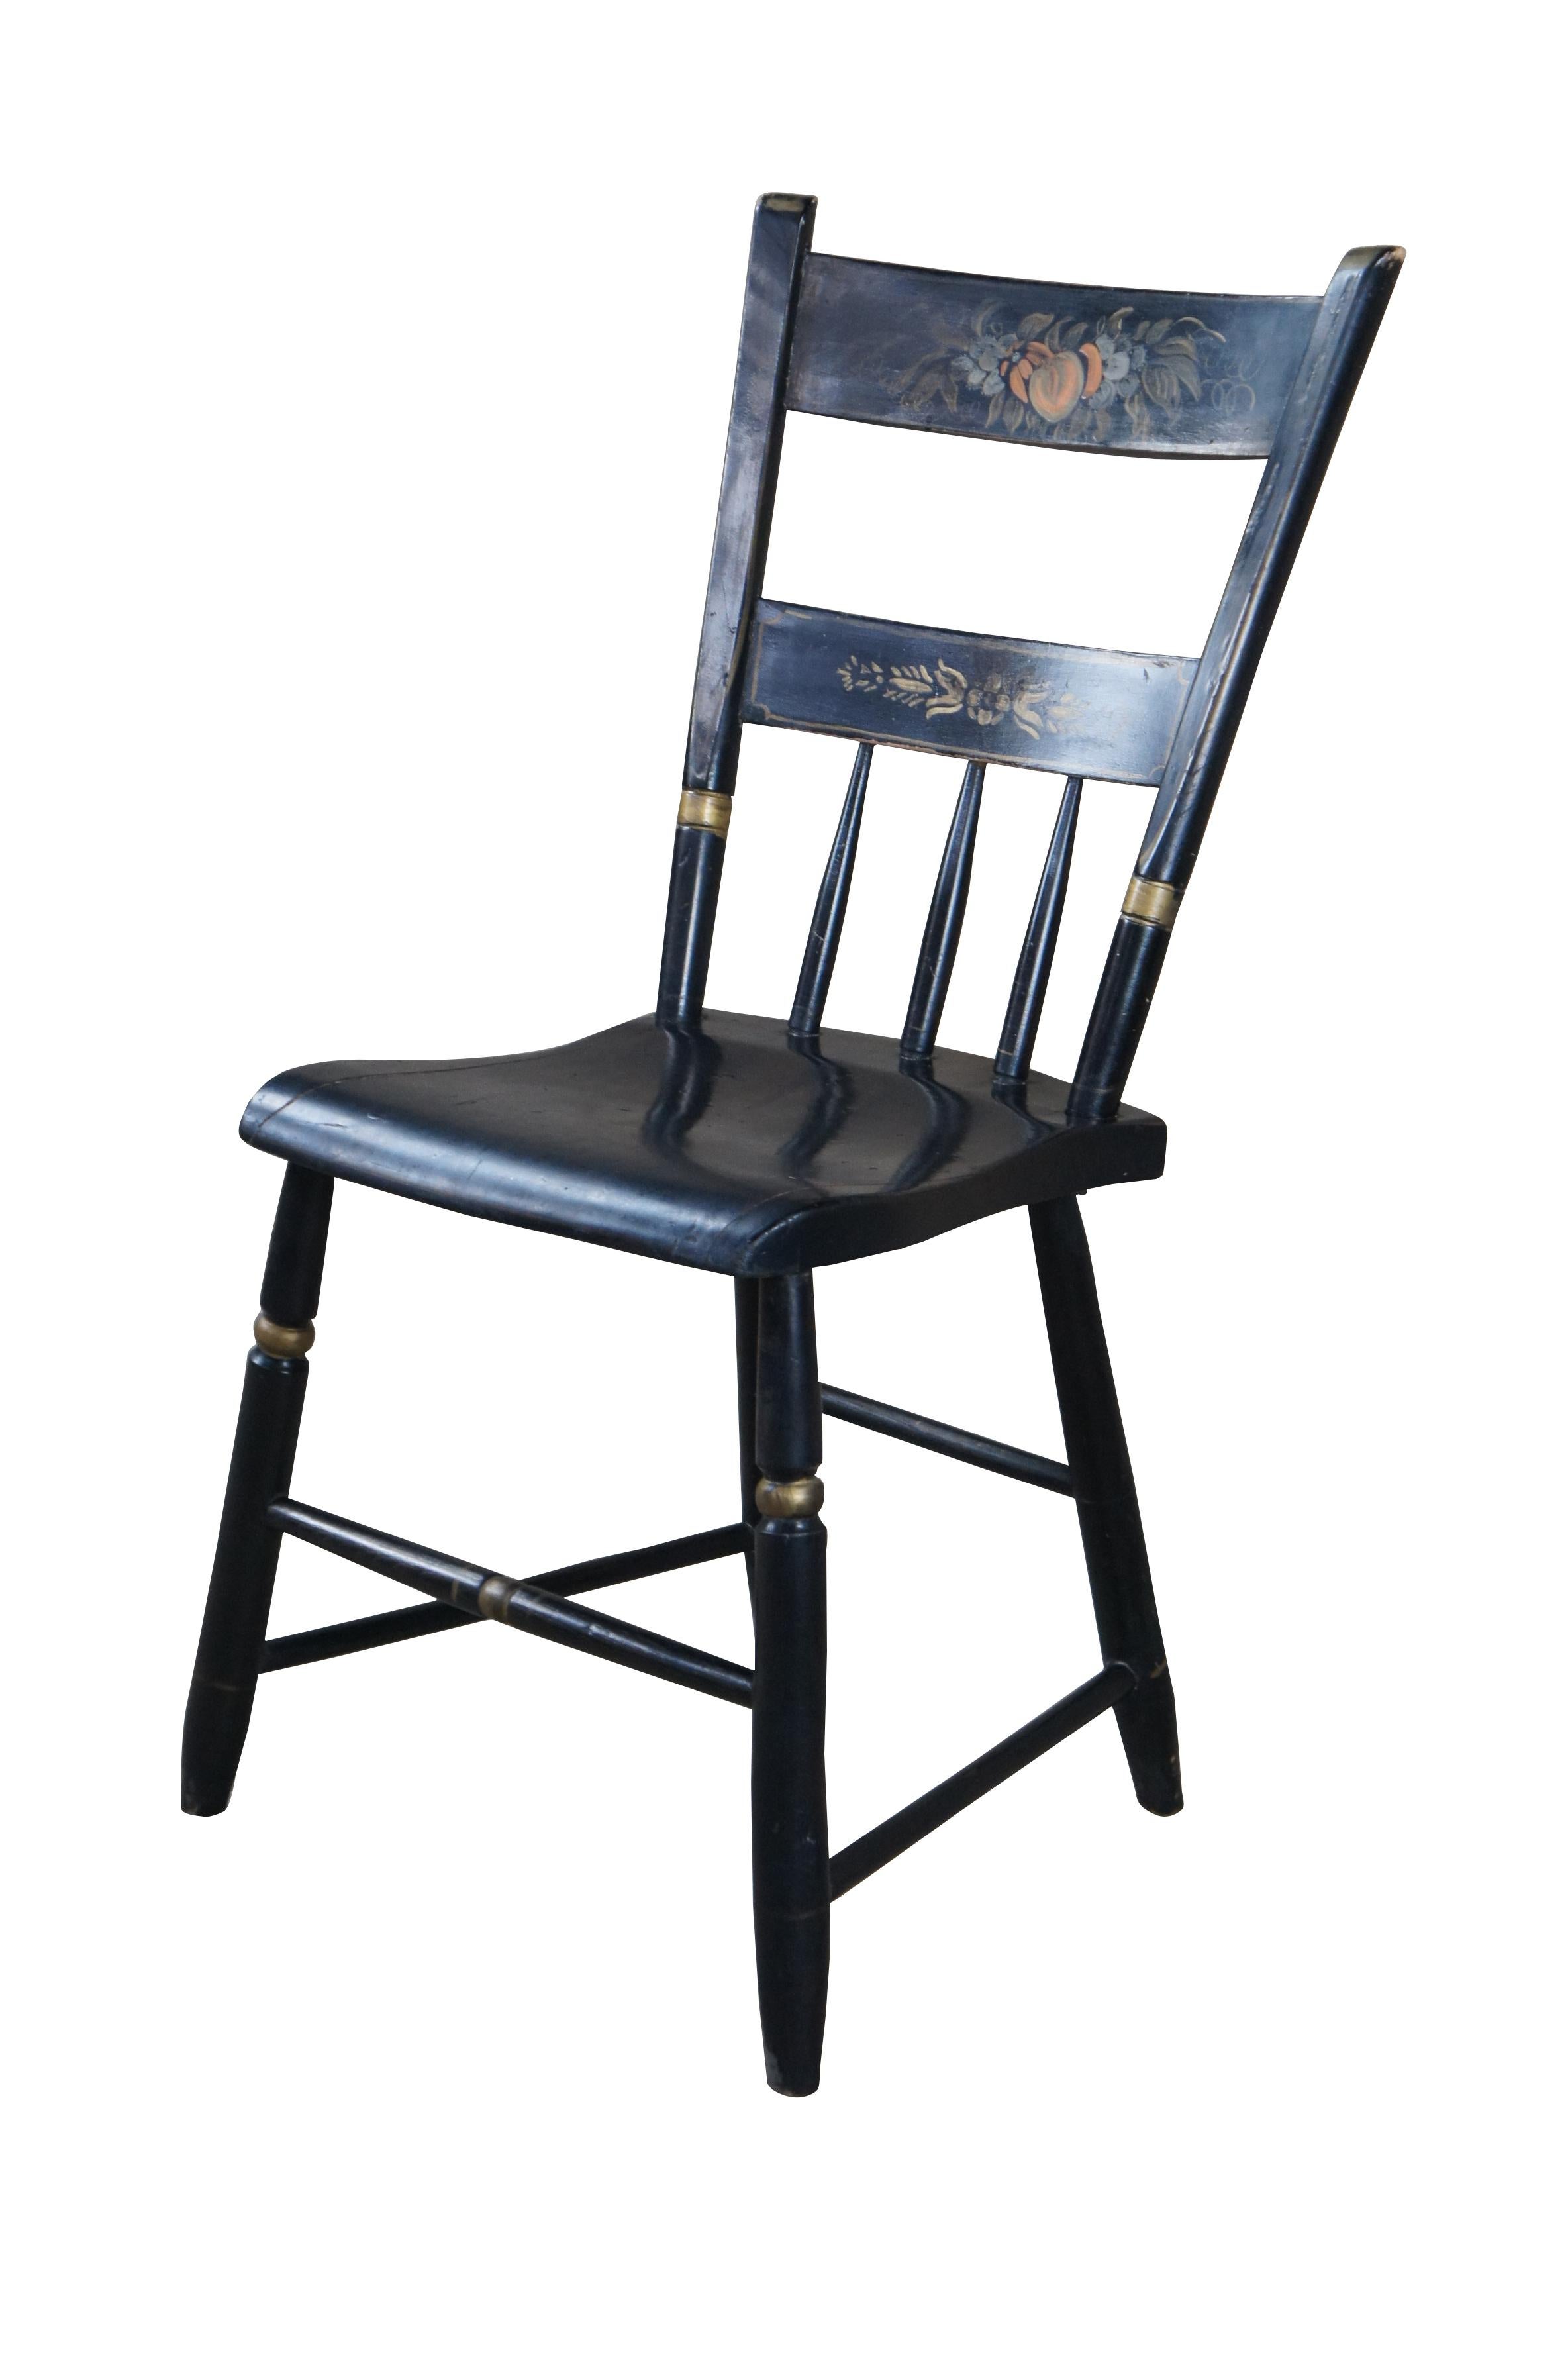 Antique primitive Hitchcock style plank seat Windsor chair featuring black stenciled fruit design with gold accents.